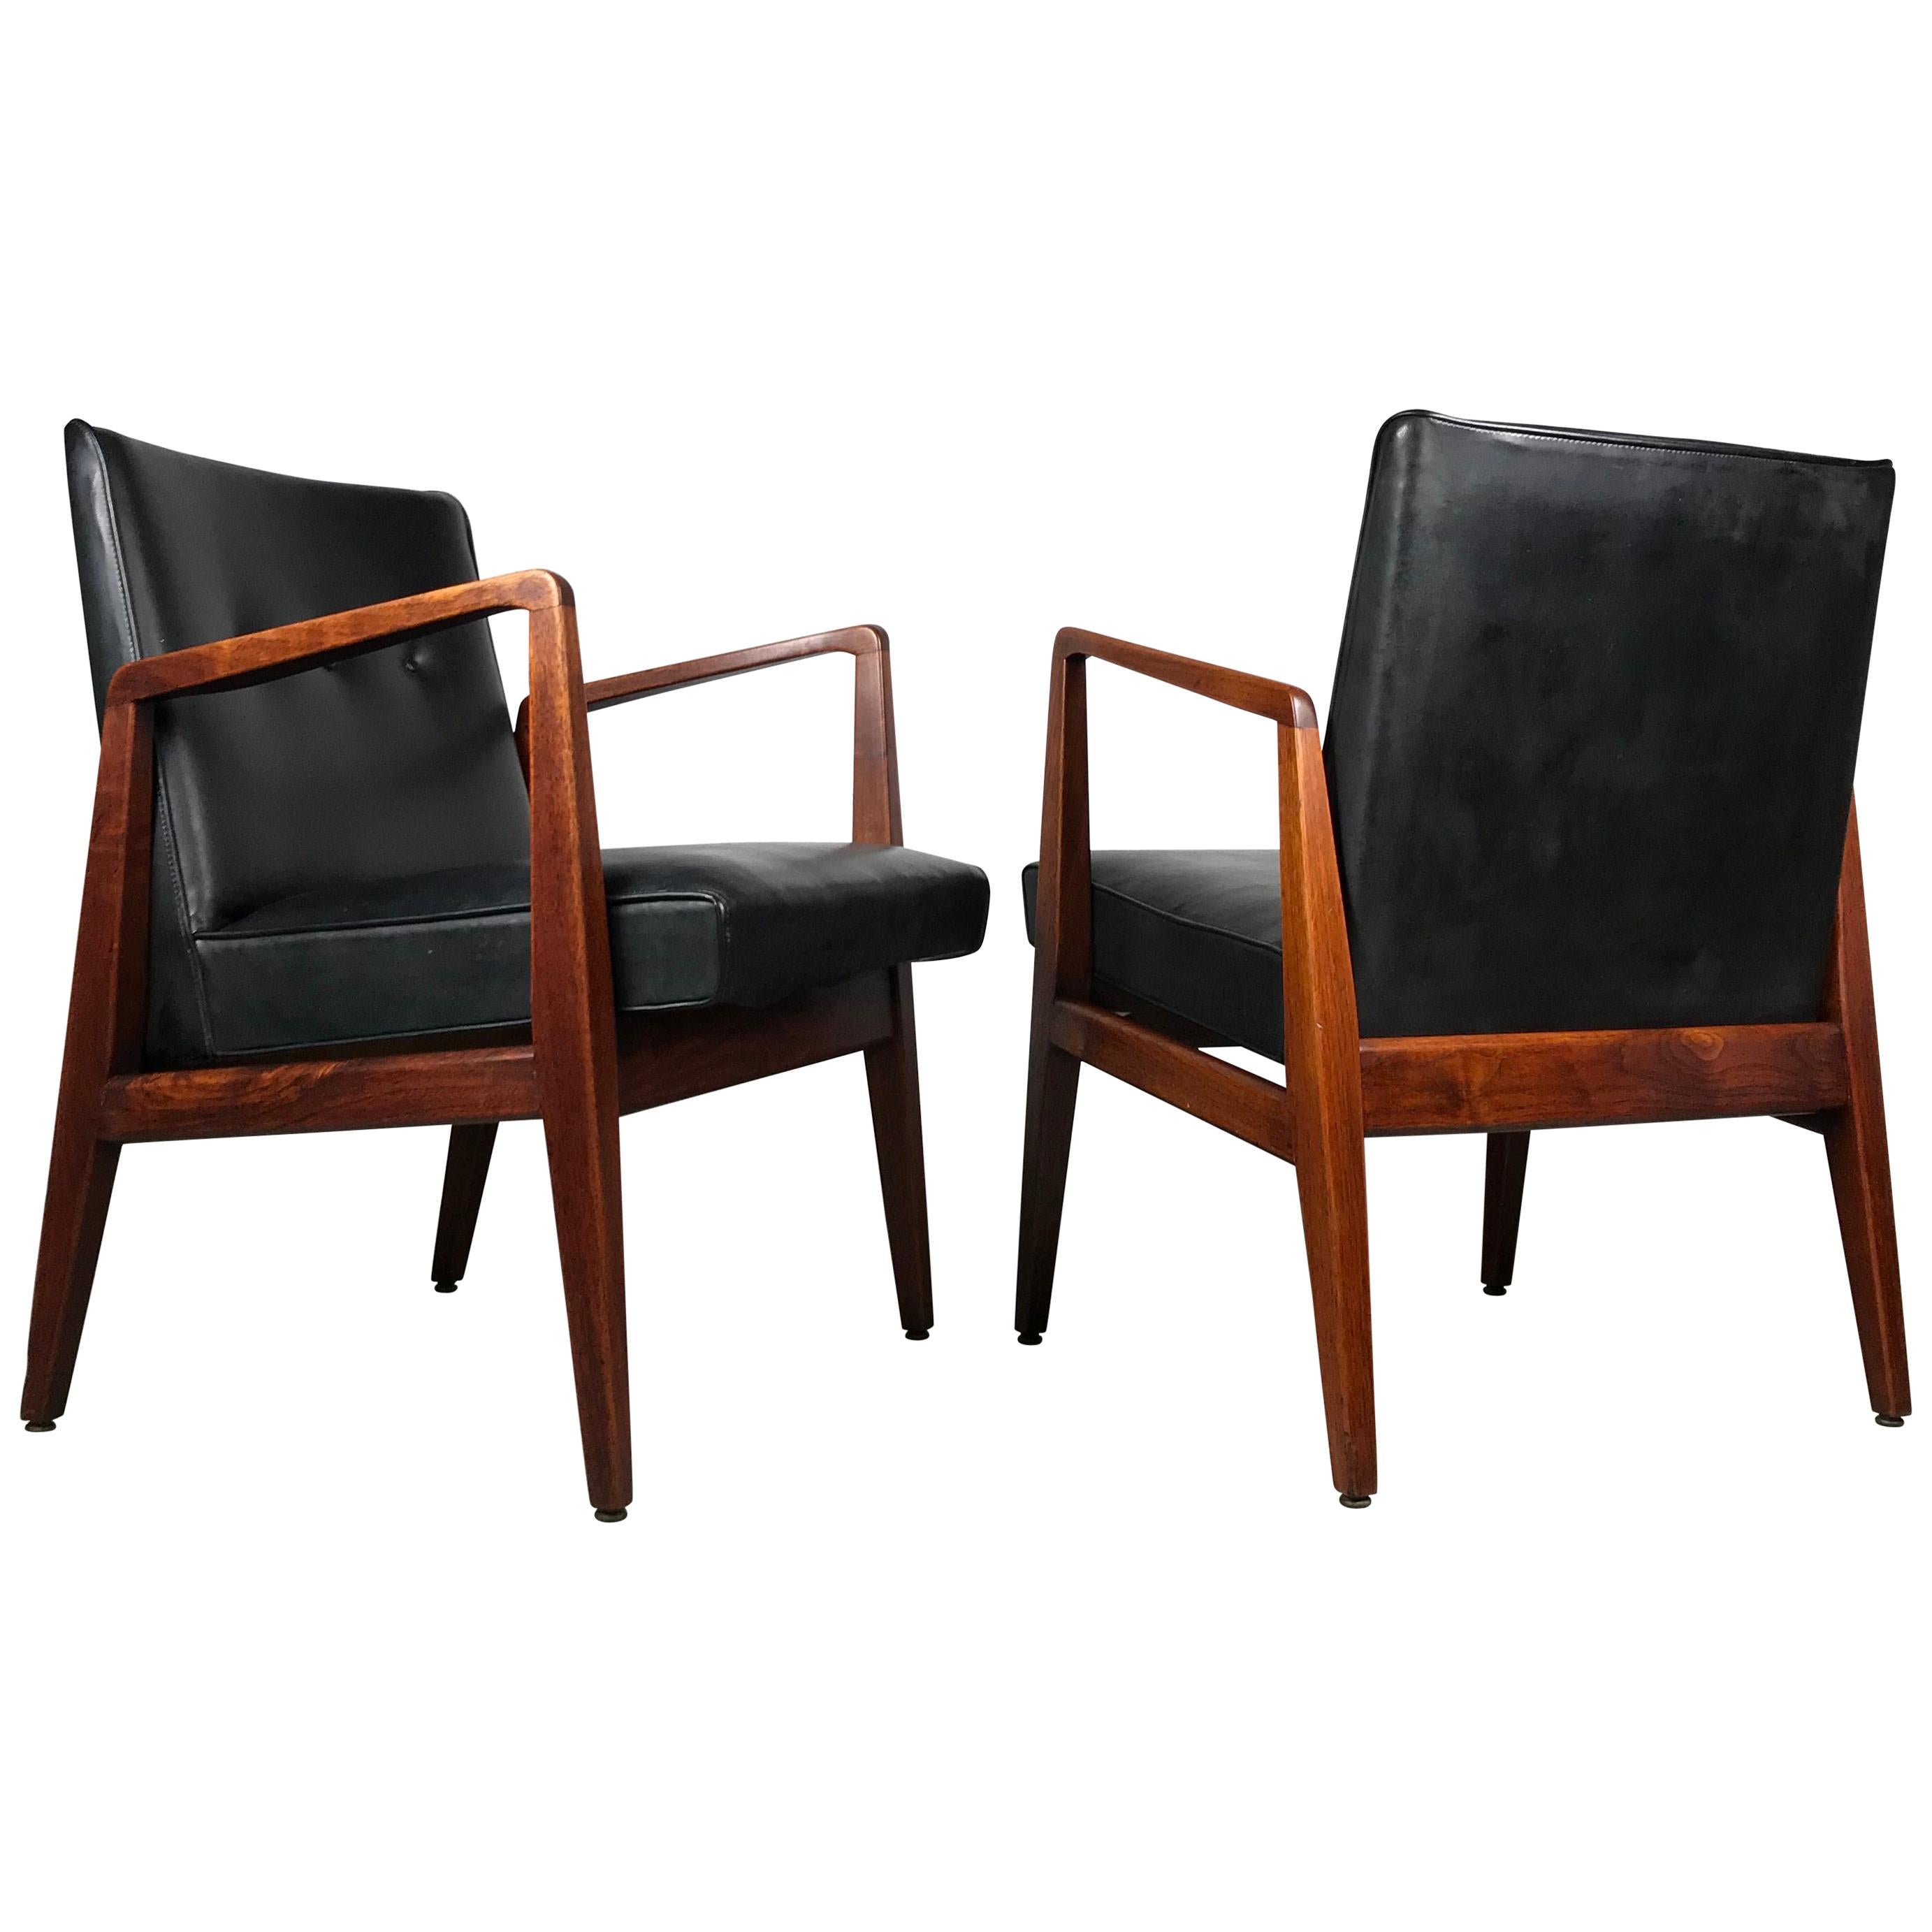 Pair of Occasional Lounge Chairs by Jens Risom Walnut and Black Vinyl Original